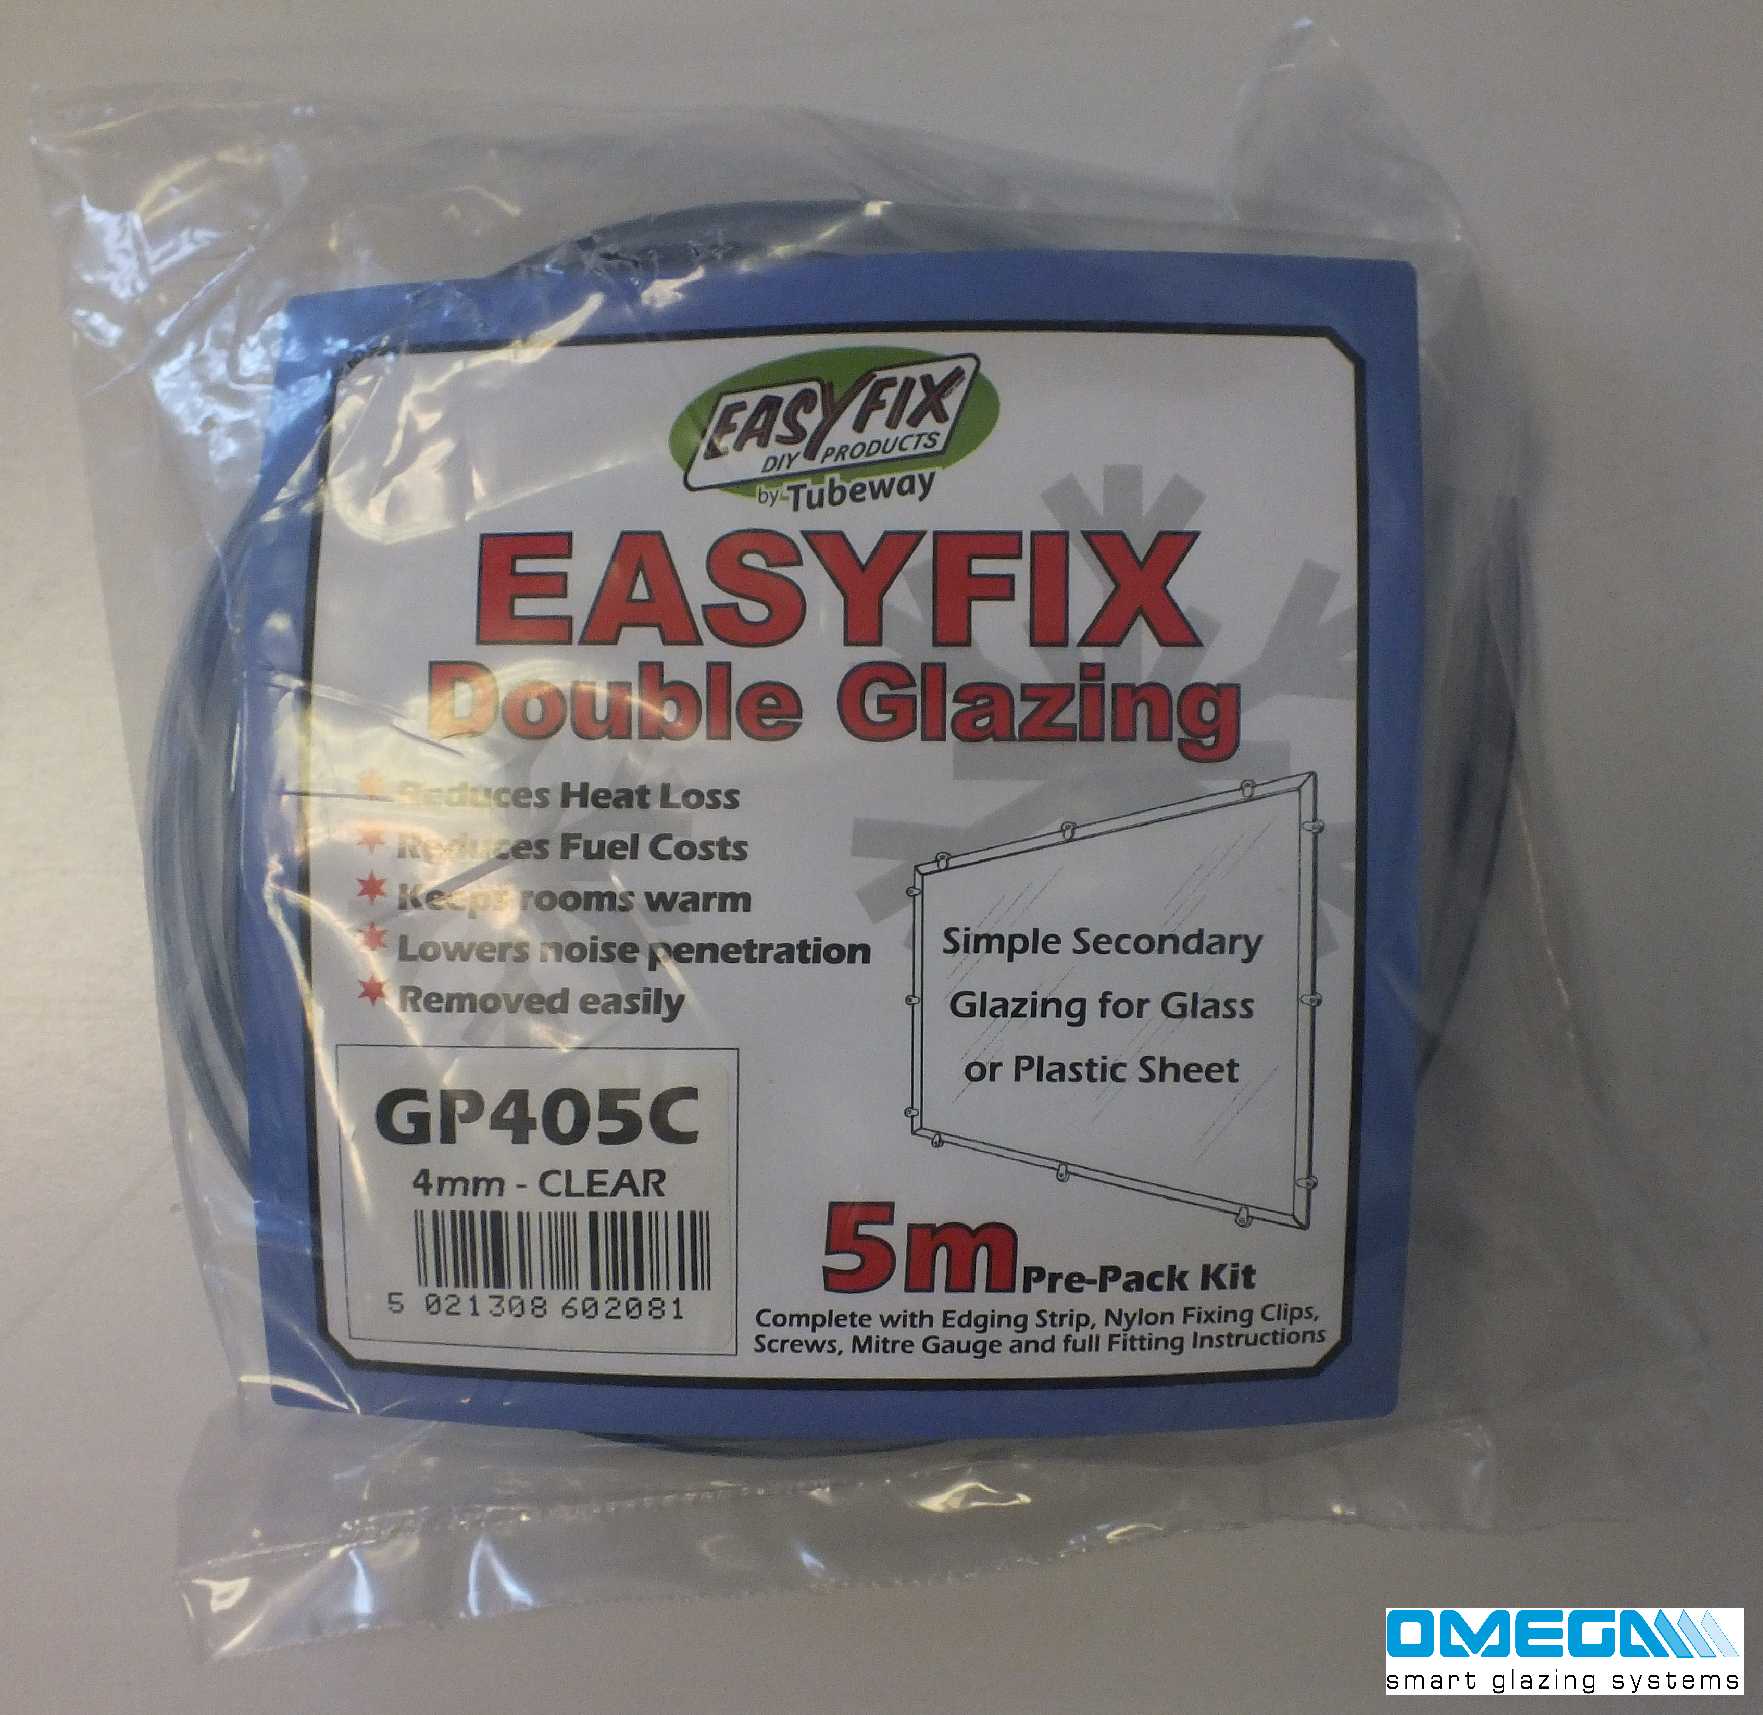 Buy Easyfix Clipglaze Edging Kit - 5m roll of edging for 2mm Glazing Thickness,White, Clear or Brown online today